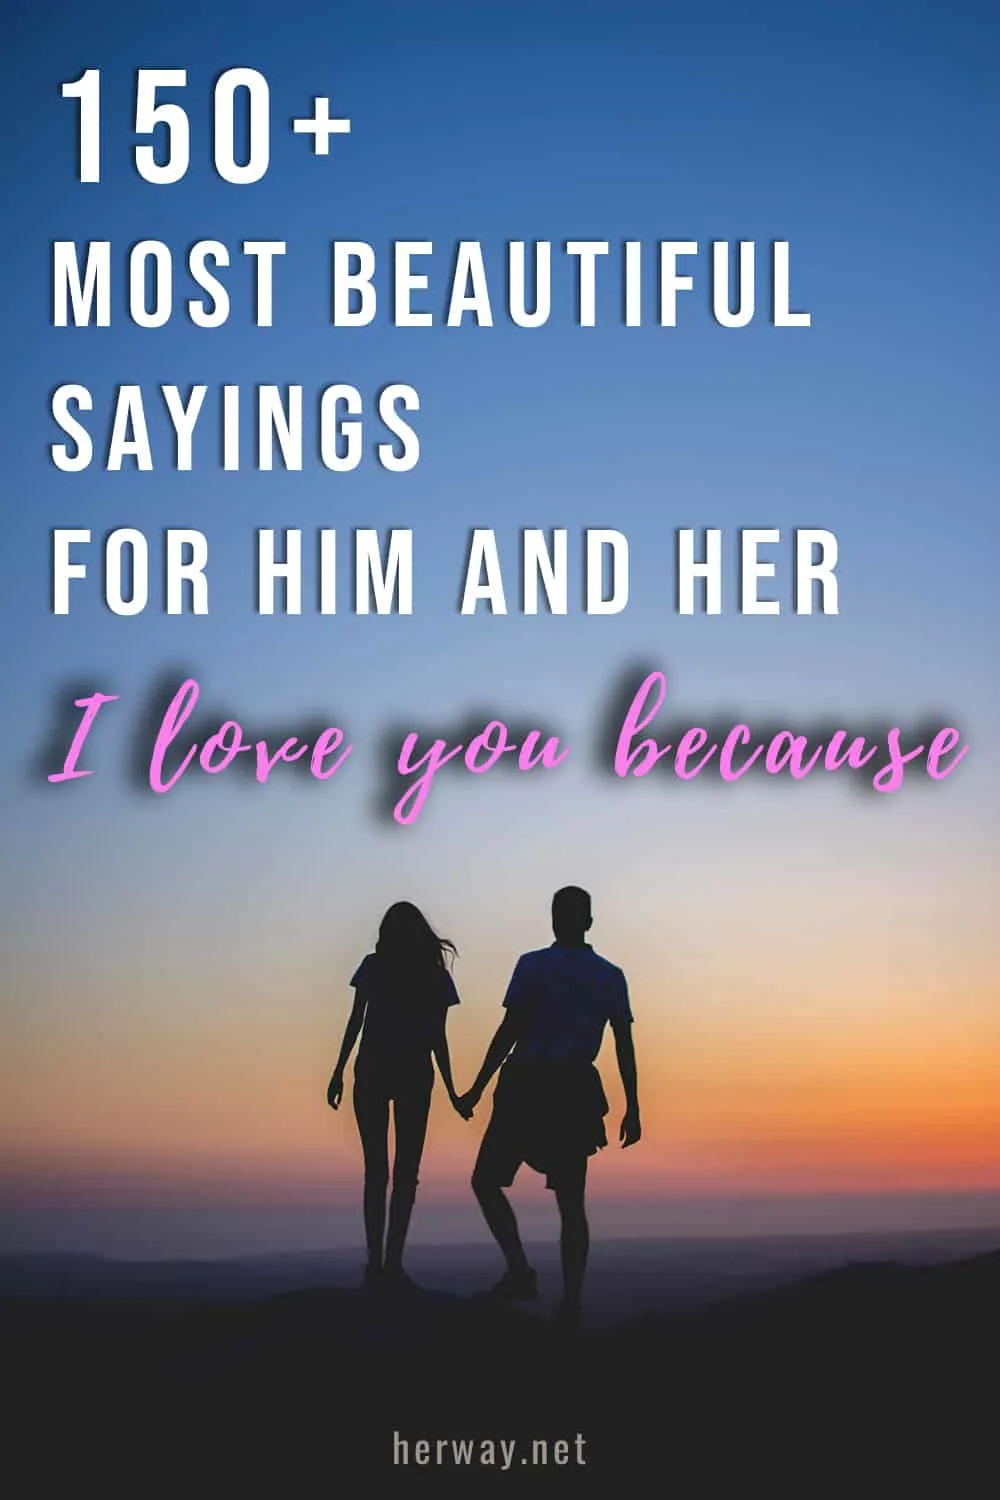 I Love You Because 150+ Most Beautiful Sayings For Him And Her Pinterest